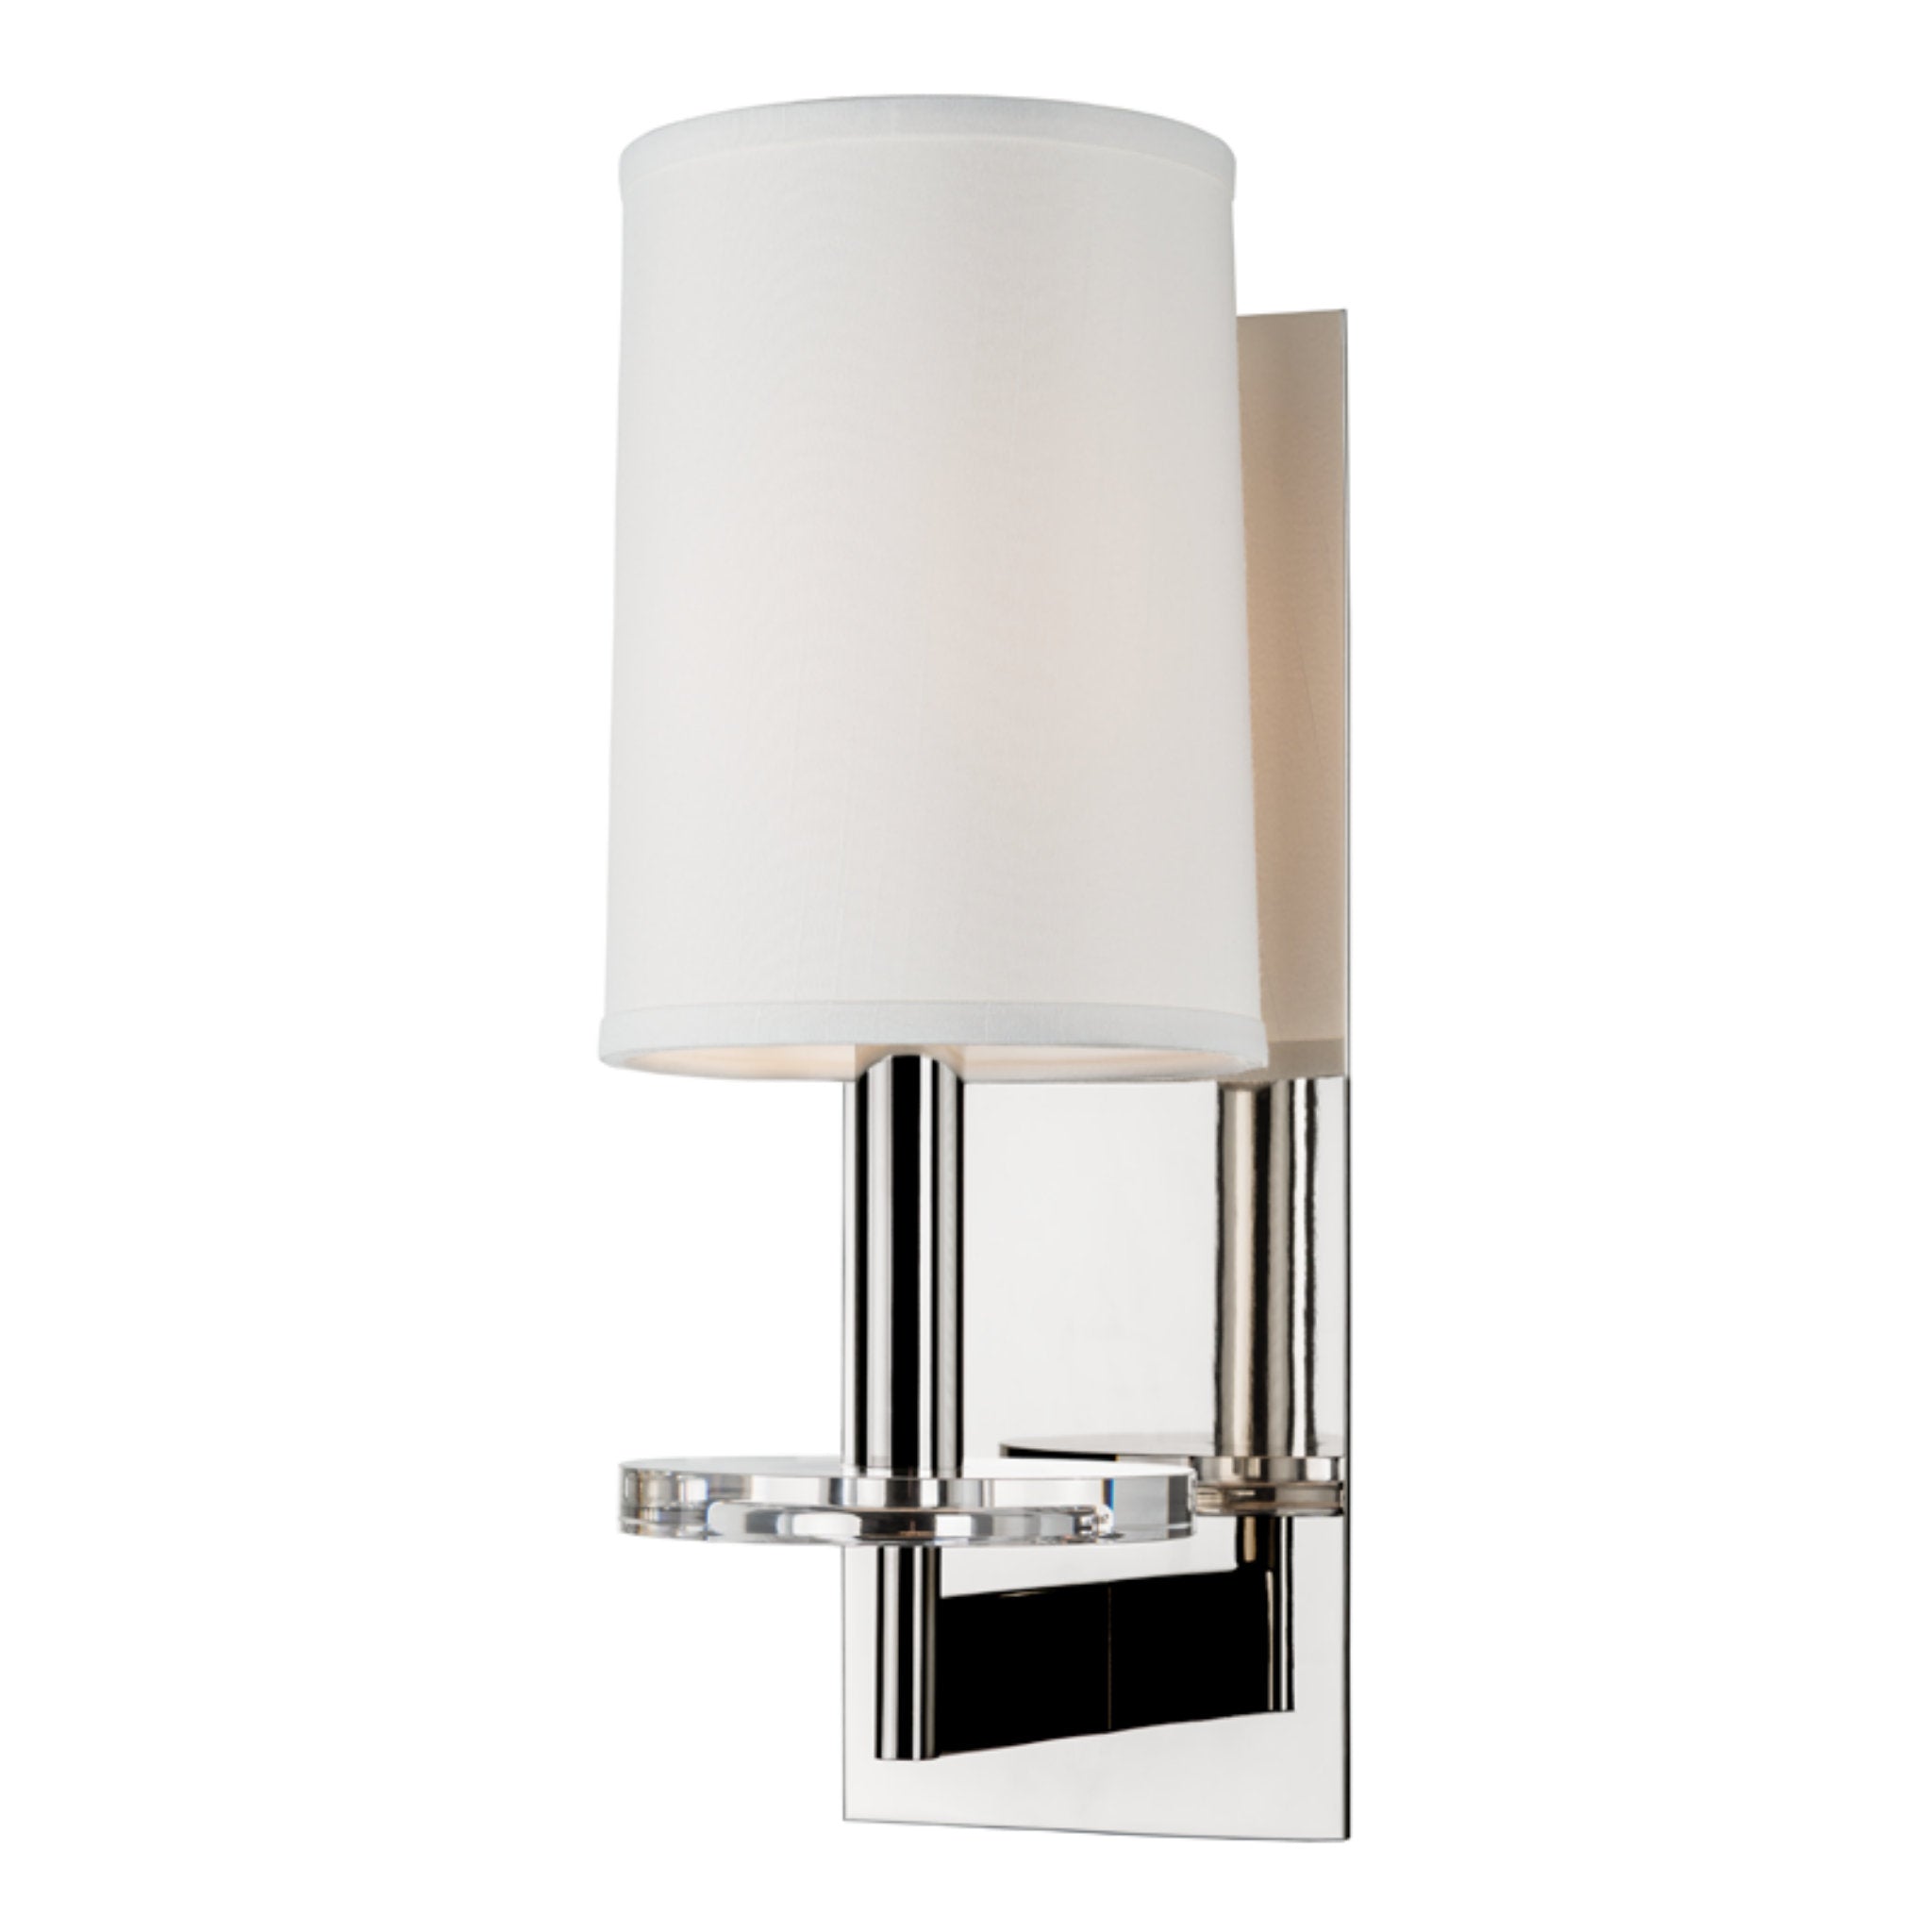 Chelsea 1 Light Wall Sconce in Polished Nickel